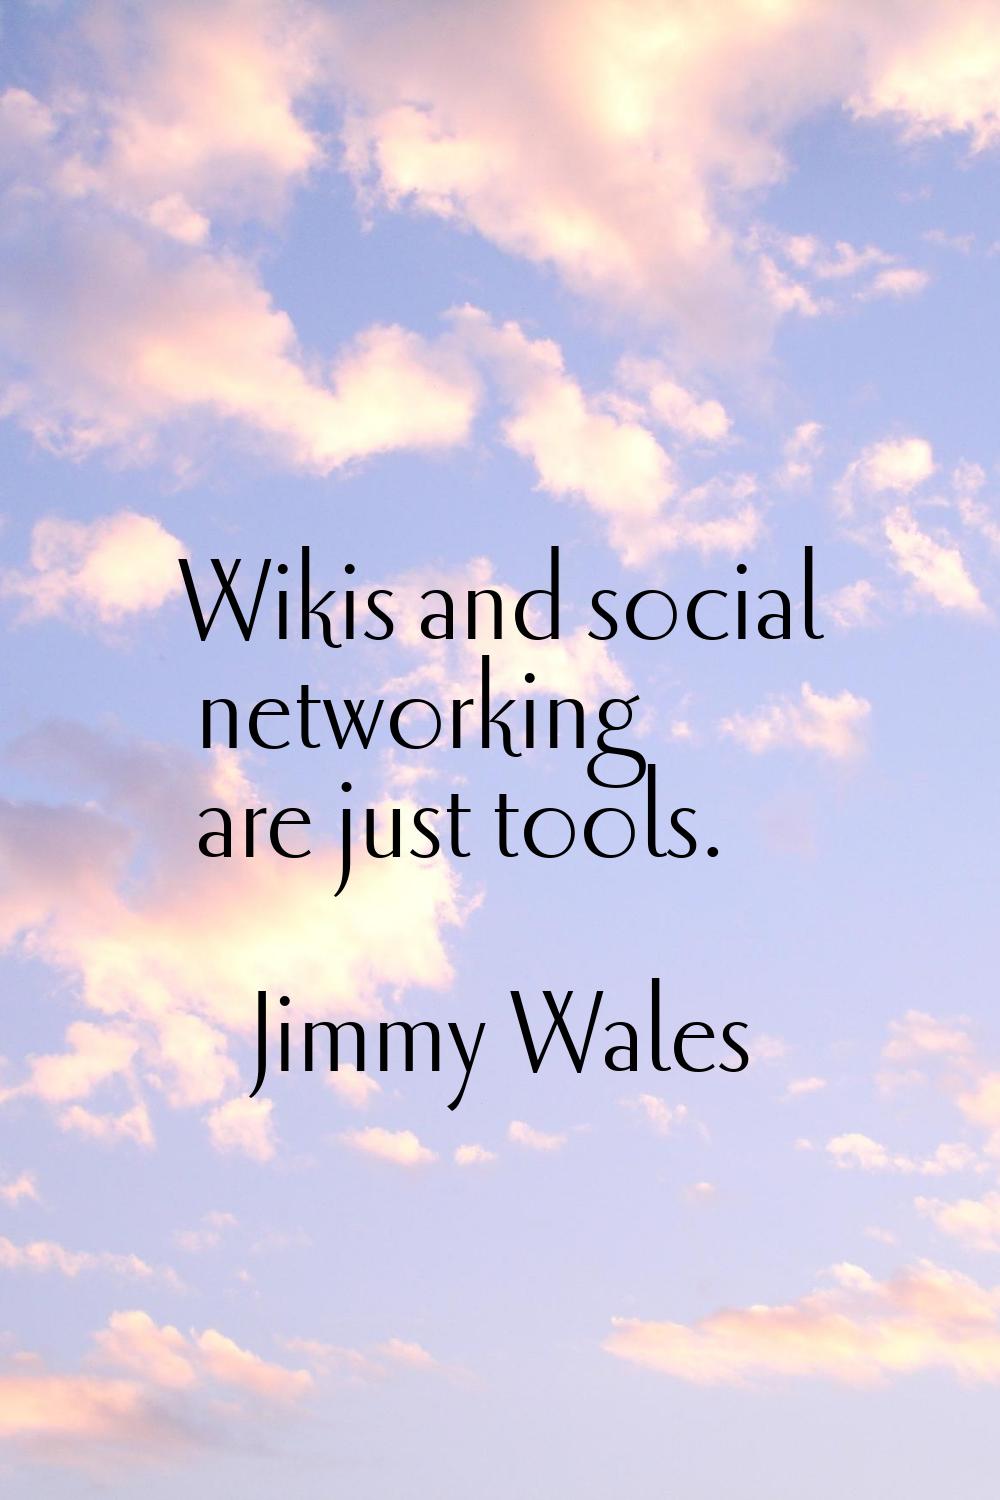 Wikis and social networking are just tools.